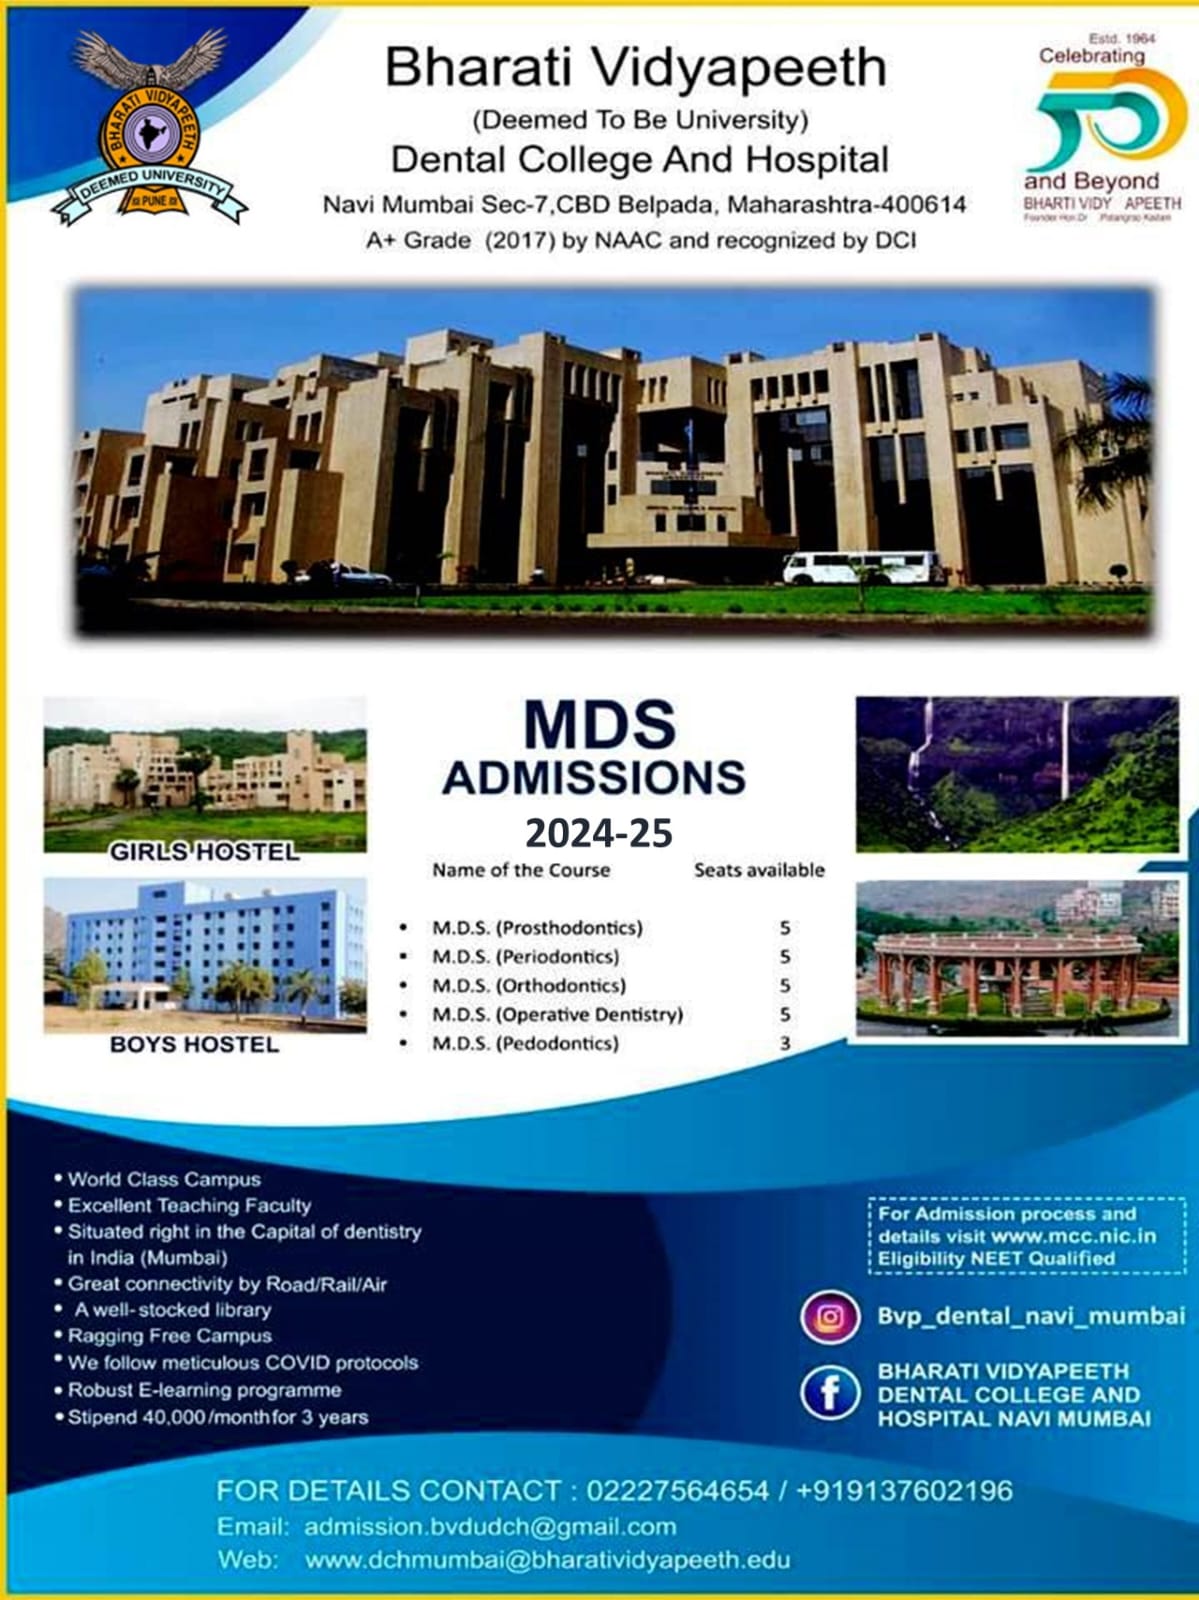 MDS ADMISSIONS 2024-25